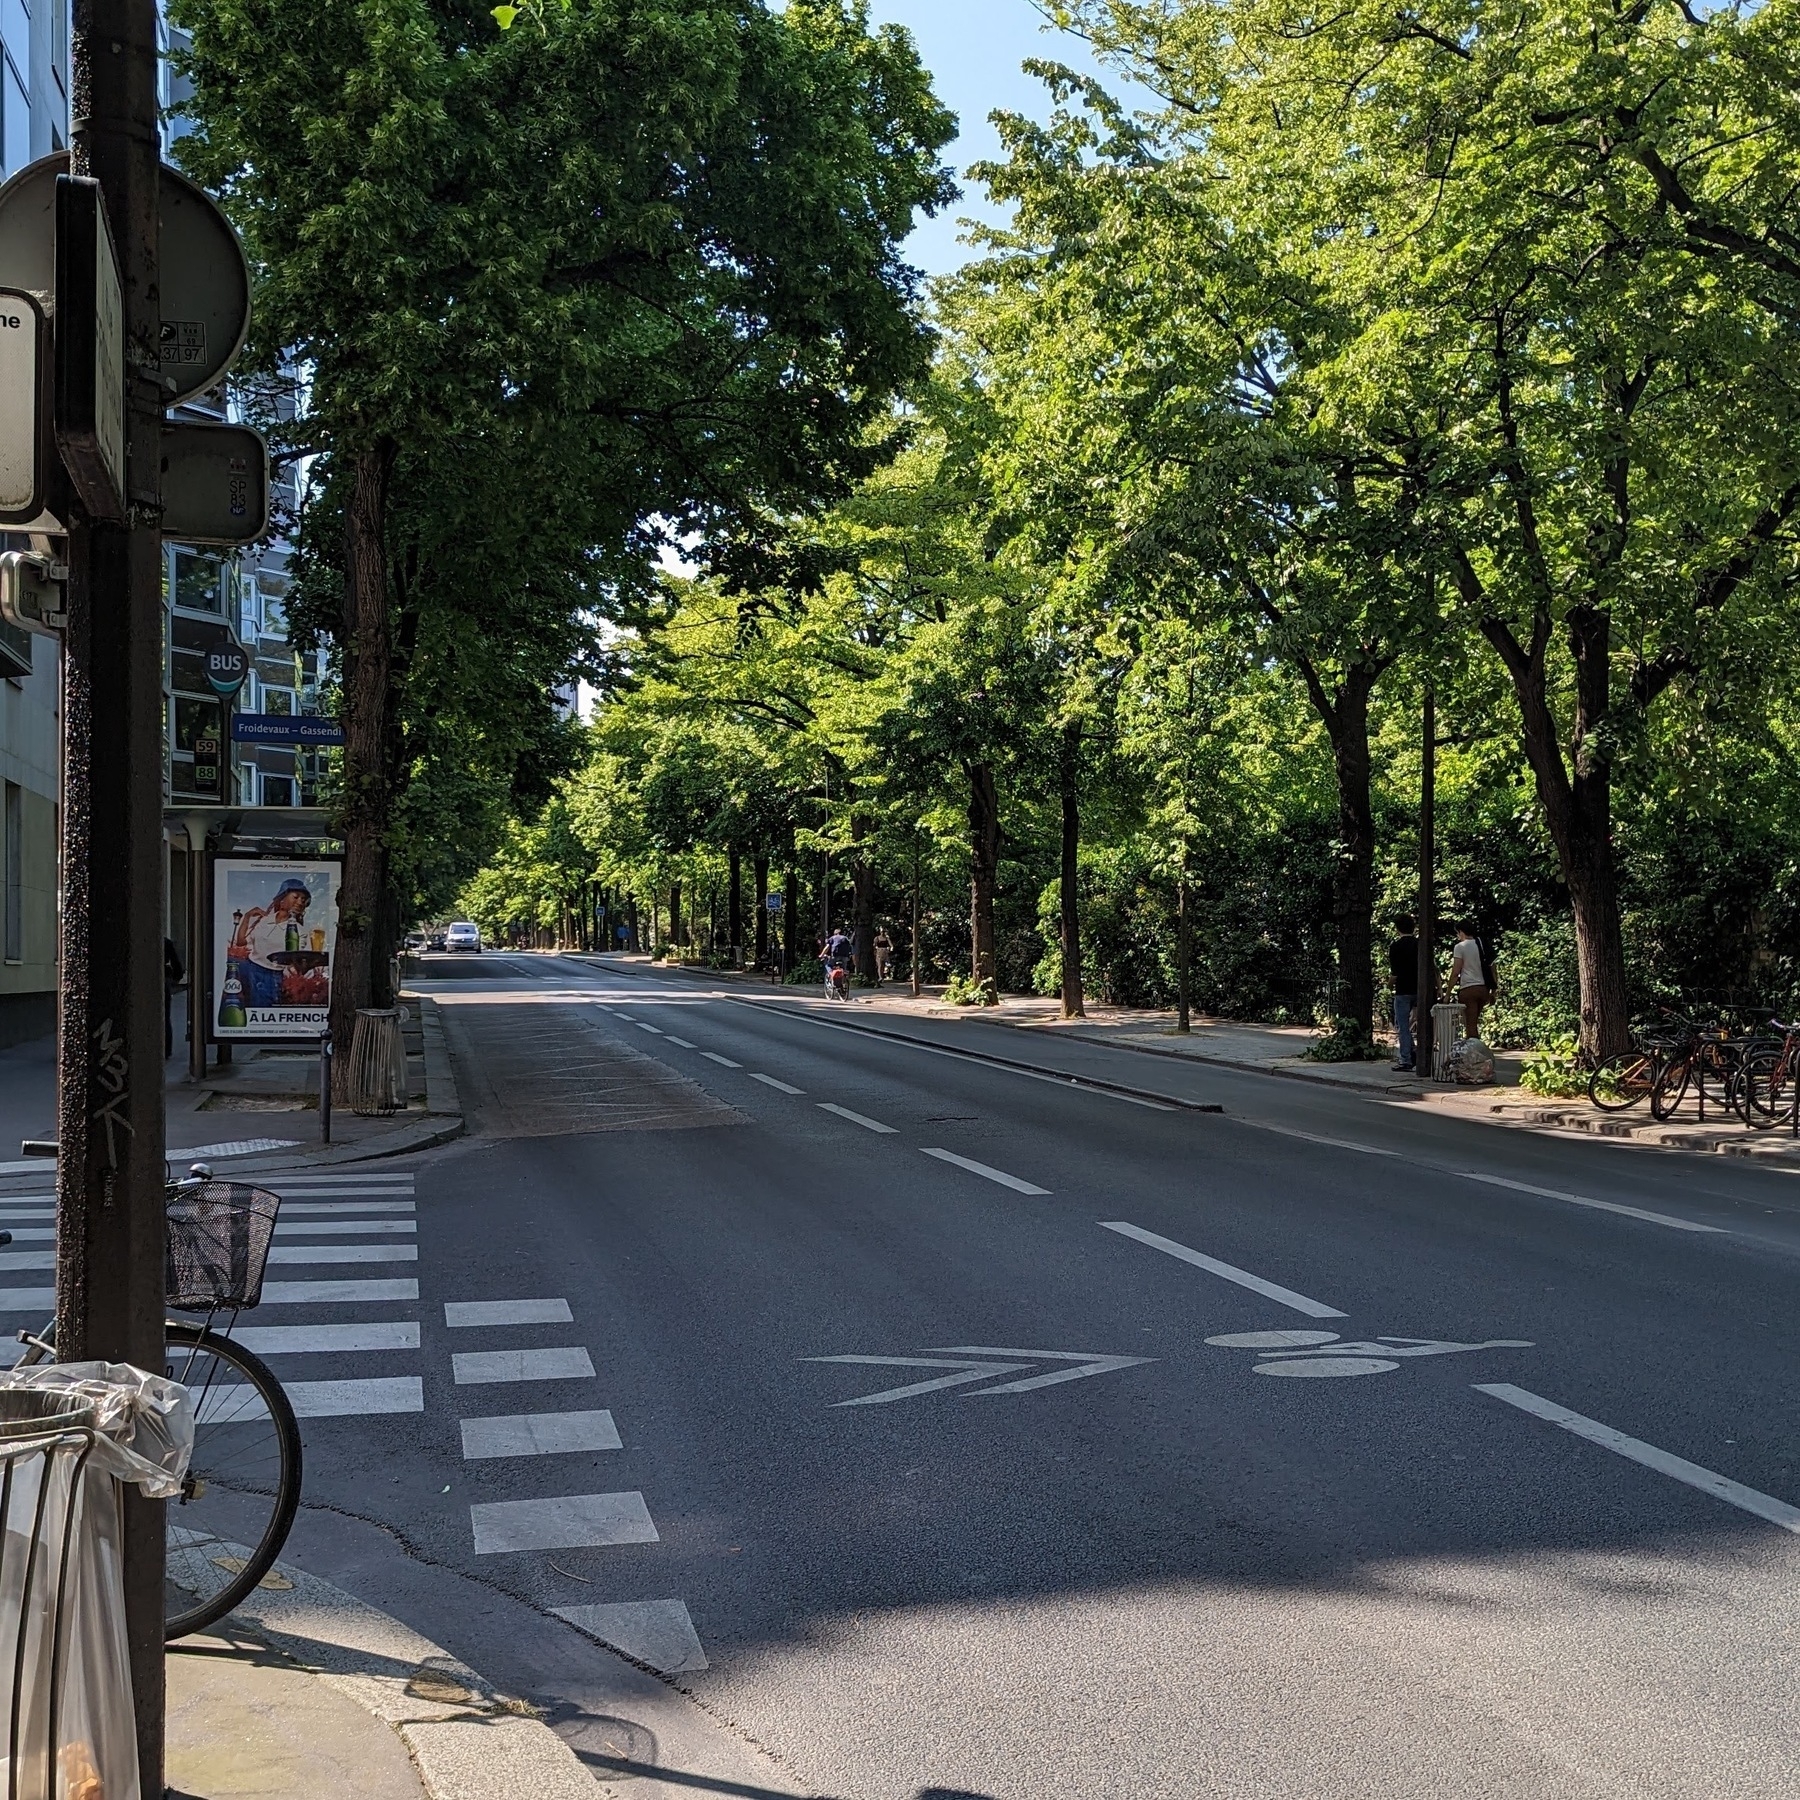 A shady Parisian street with few cars and people